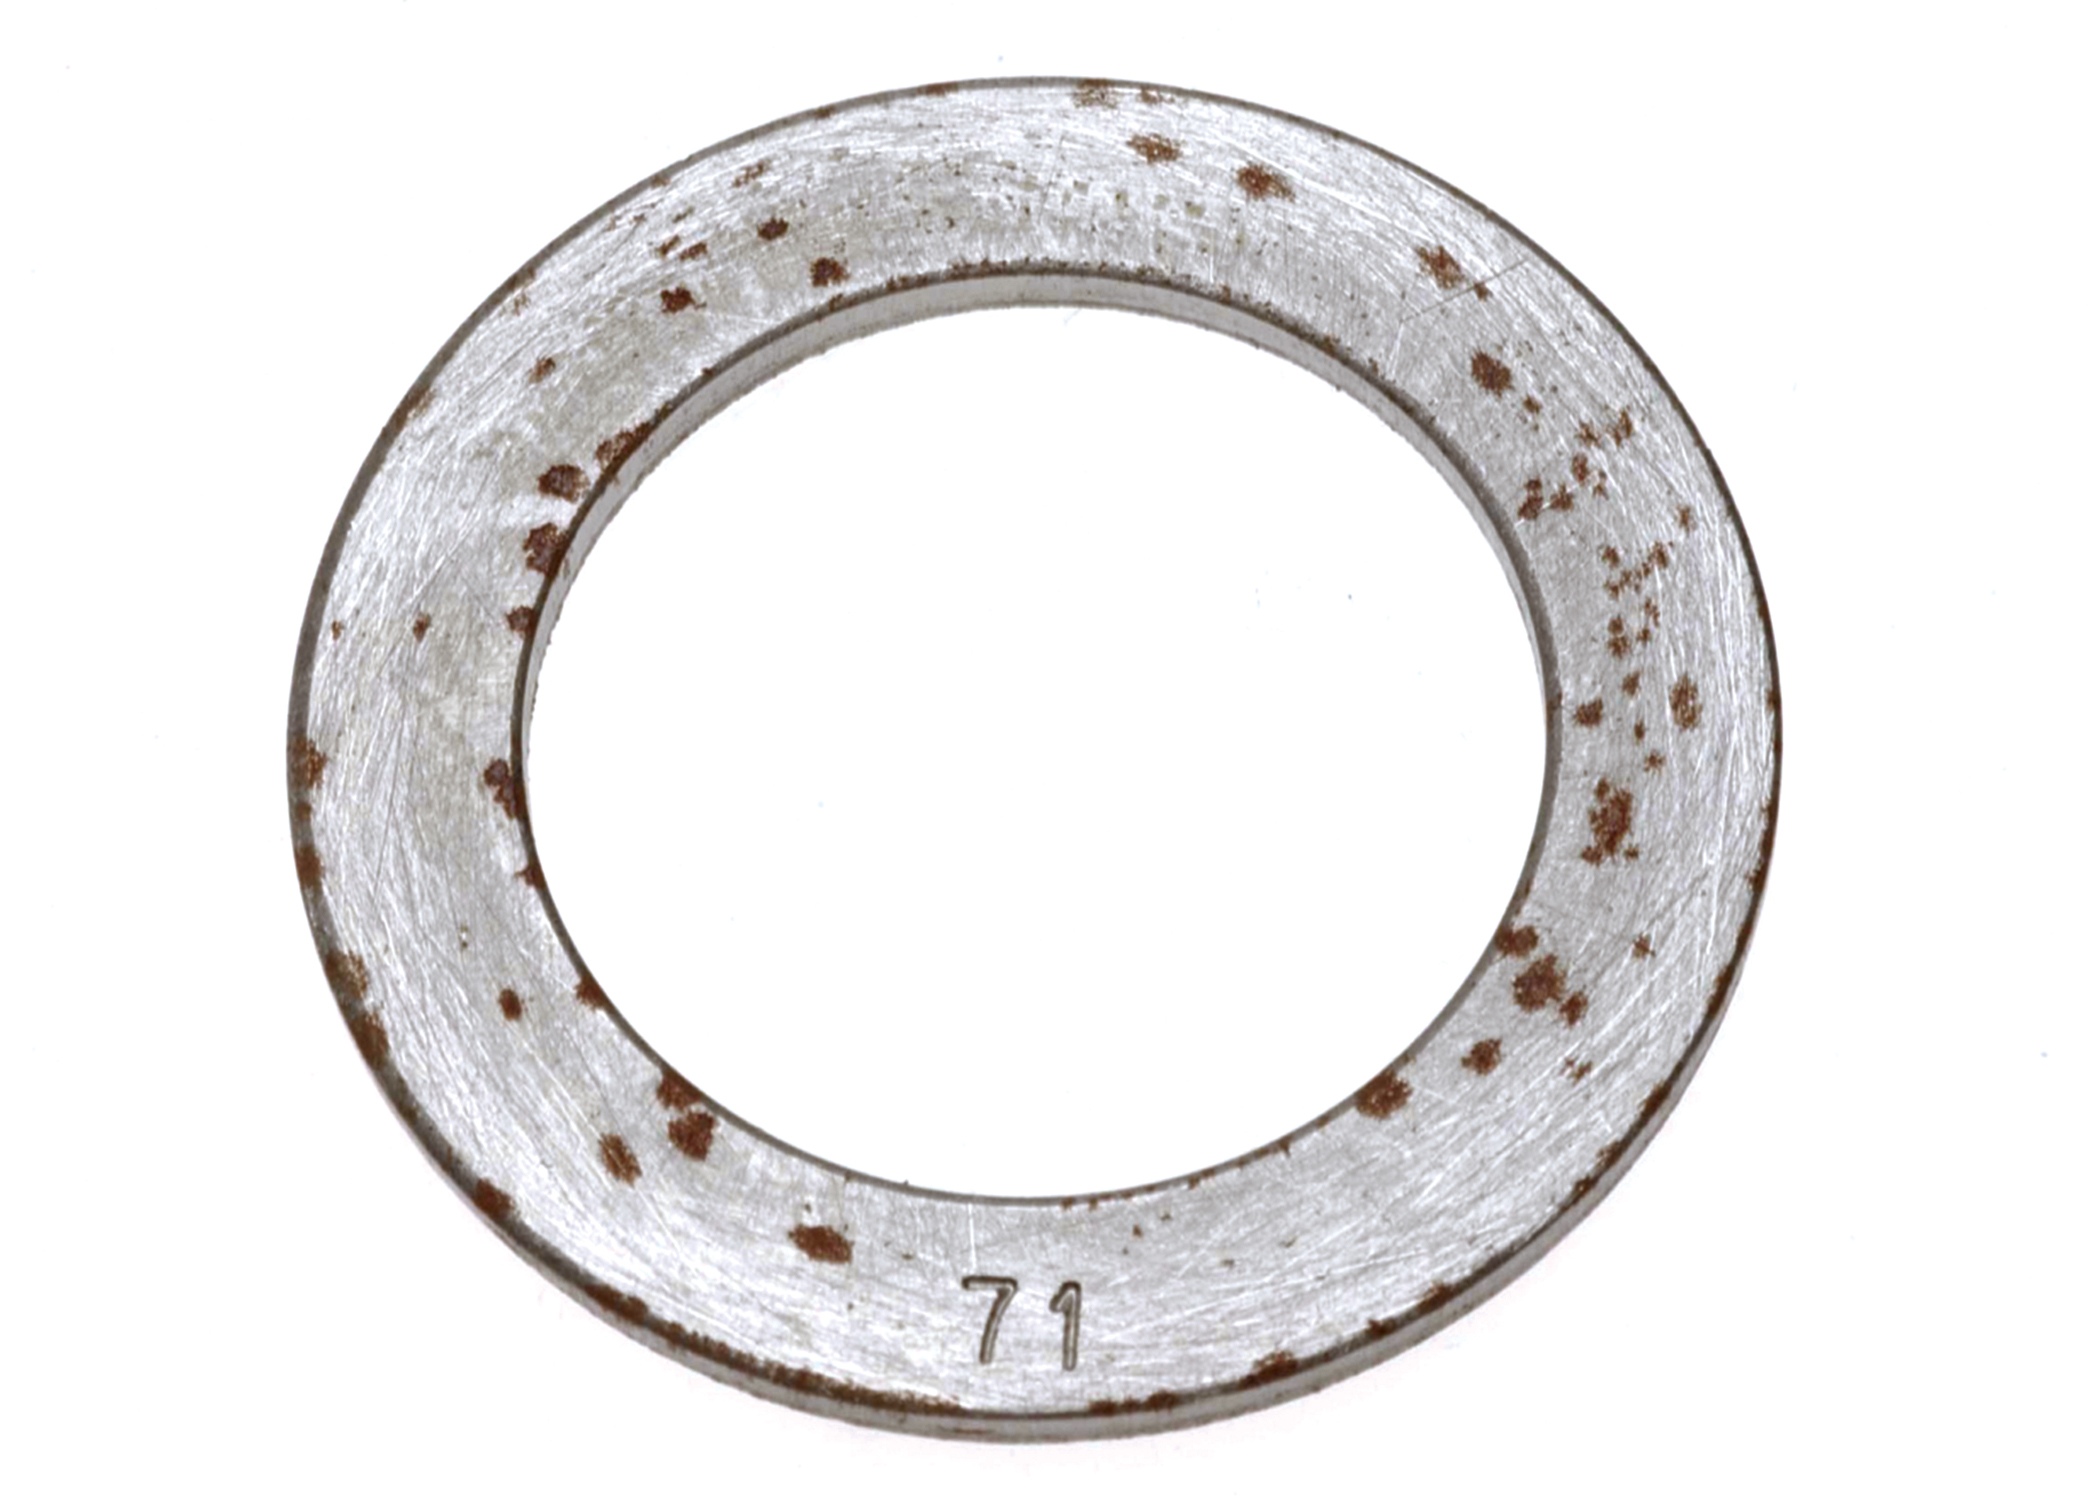 GM GENUINE PARTS - Automatic Transmission Clutch Housing Thrust Washer (Reverse) - GMP 8642071